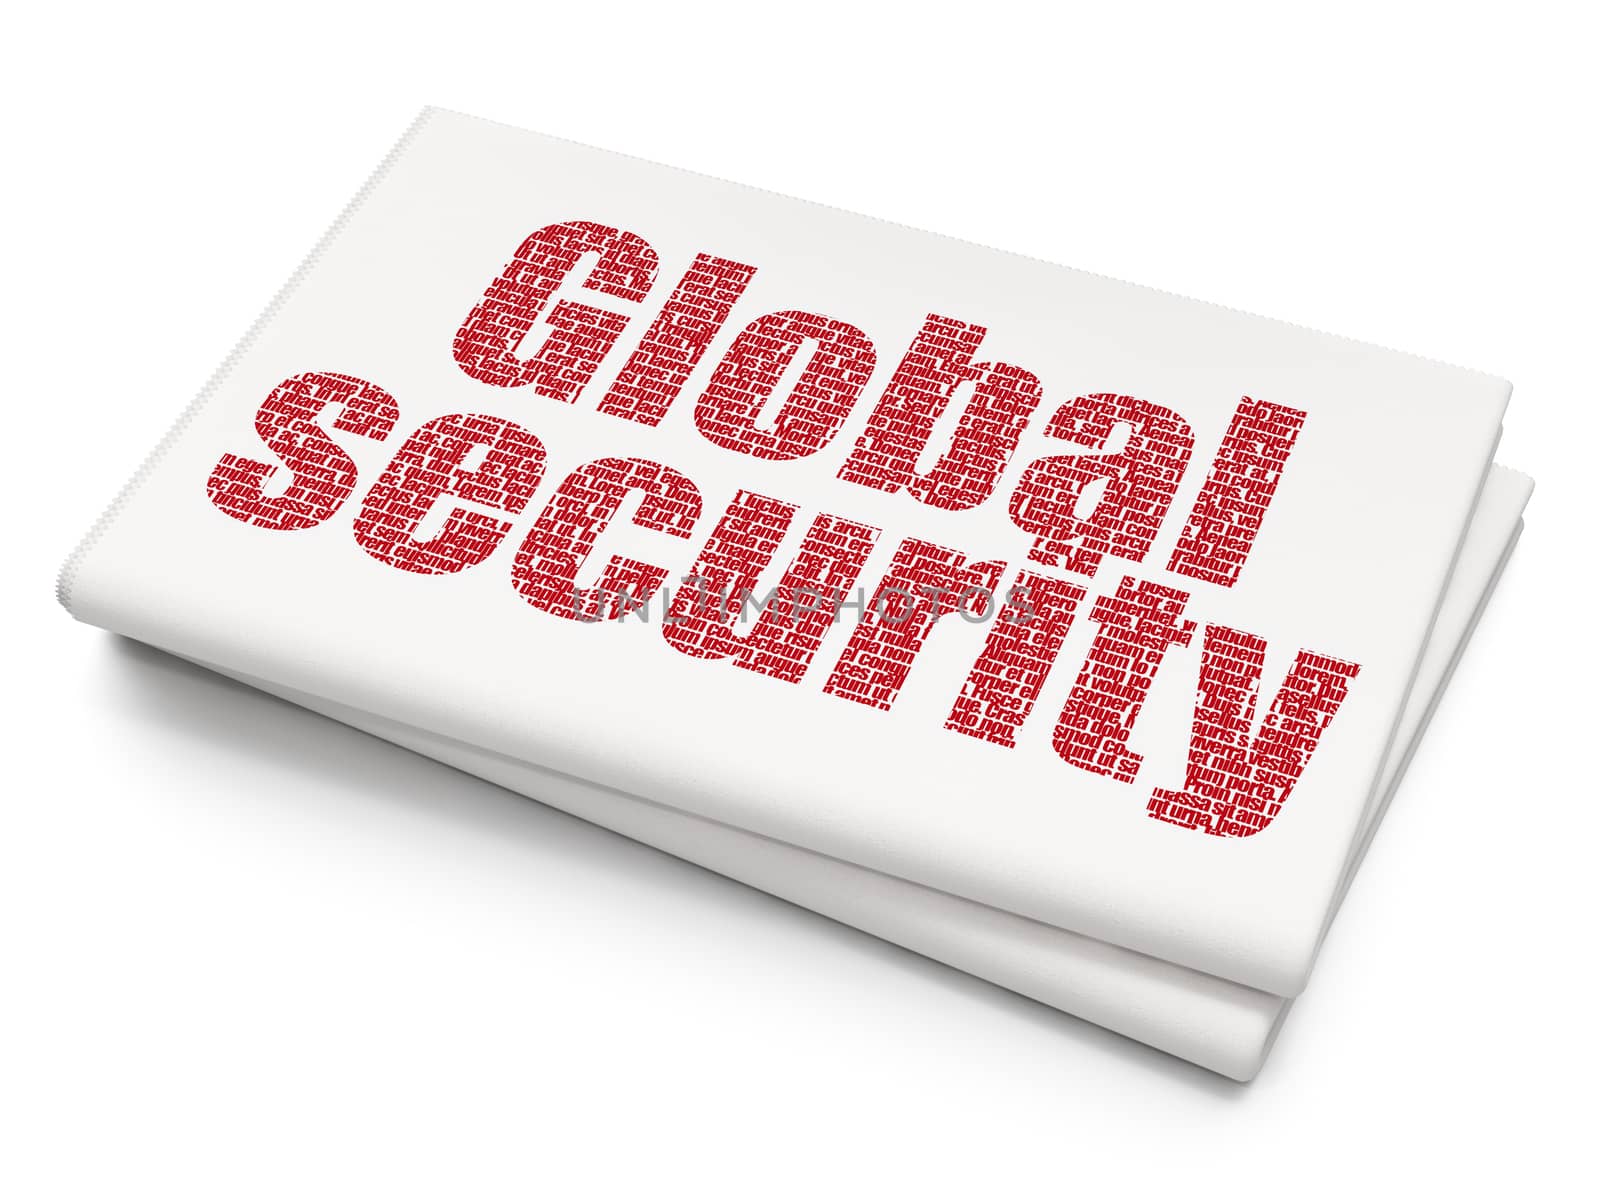 Security concept: Pixelated red text Global Security on Blank Newspaper background, 3D rendering